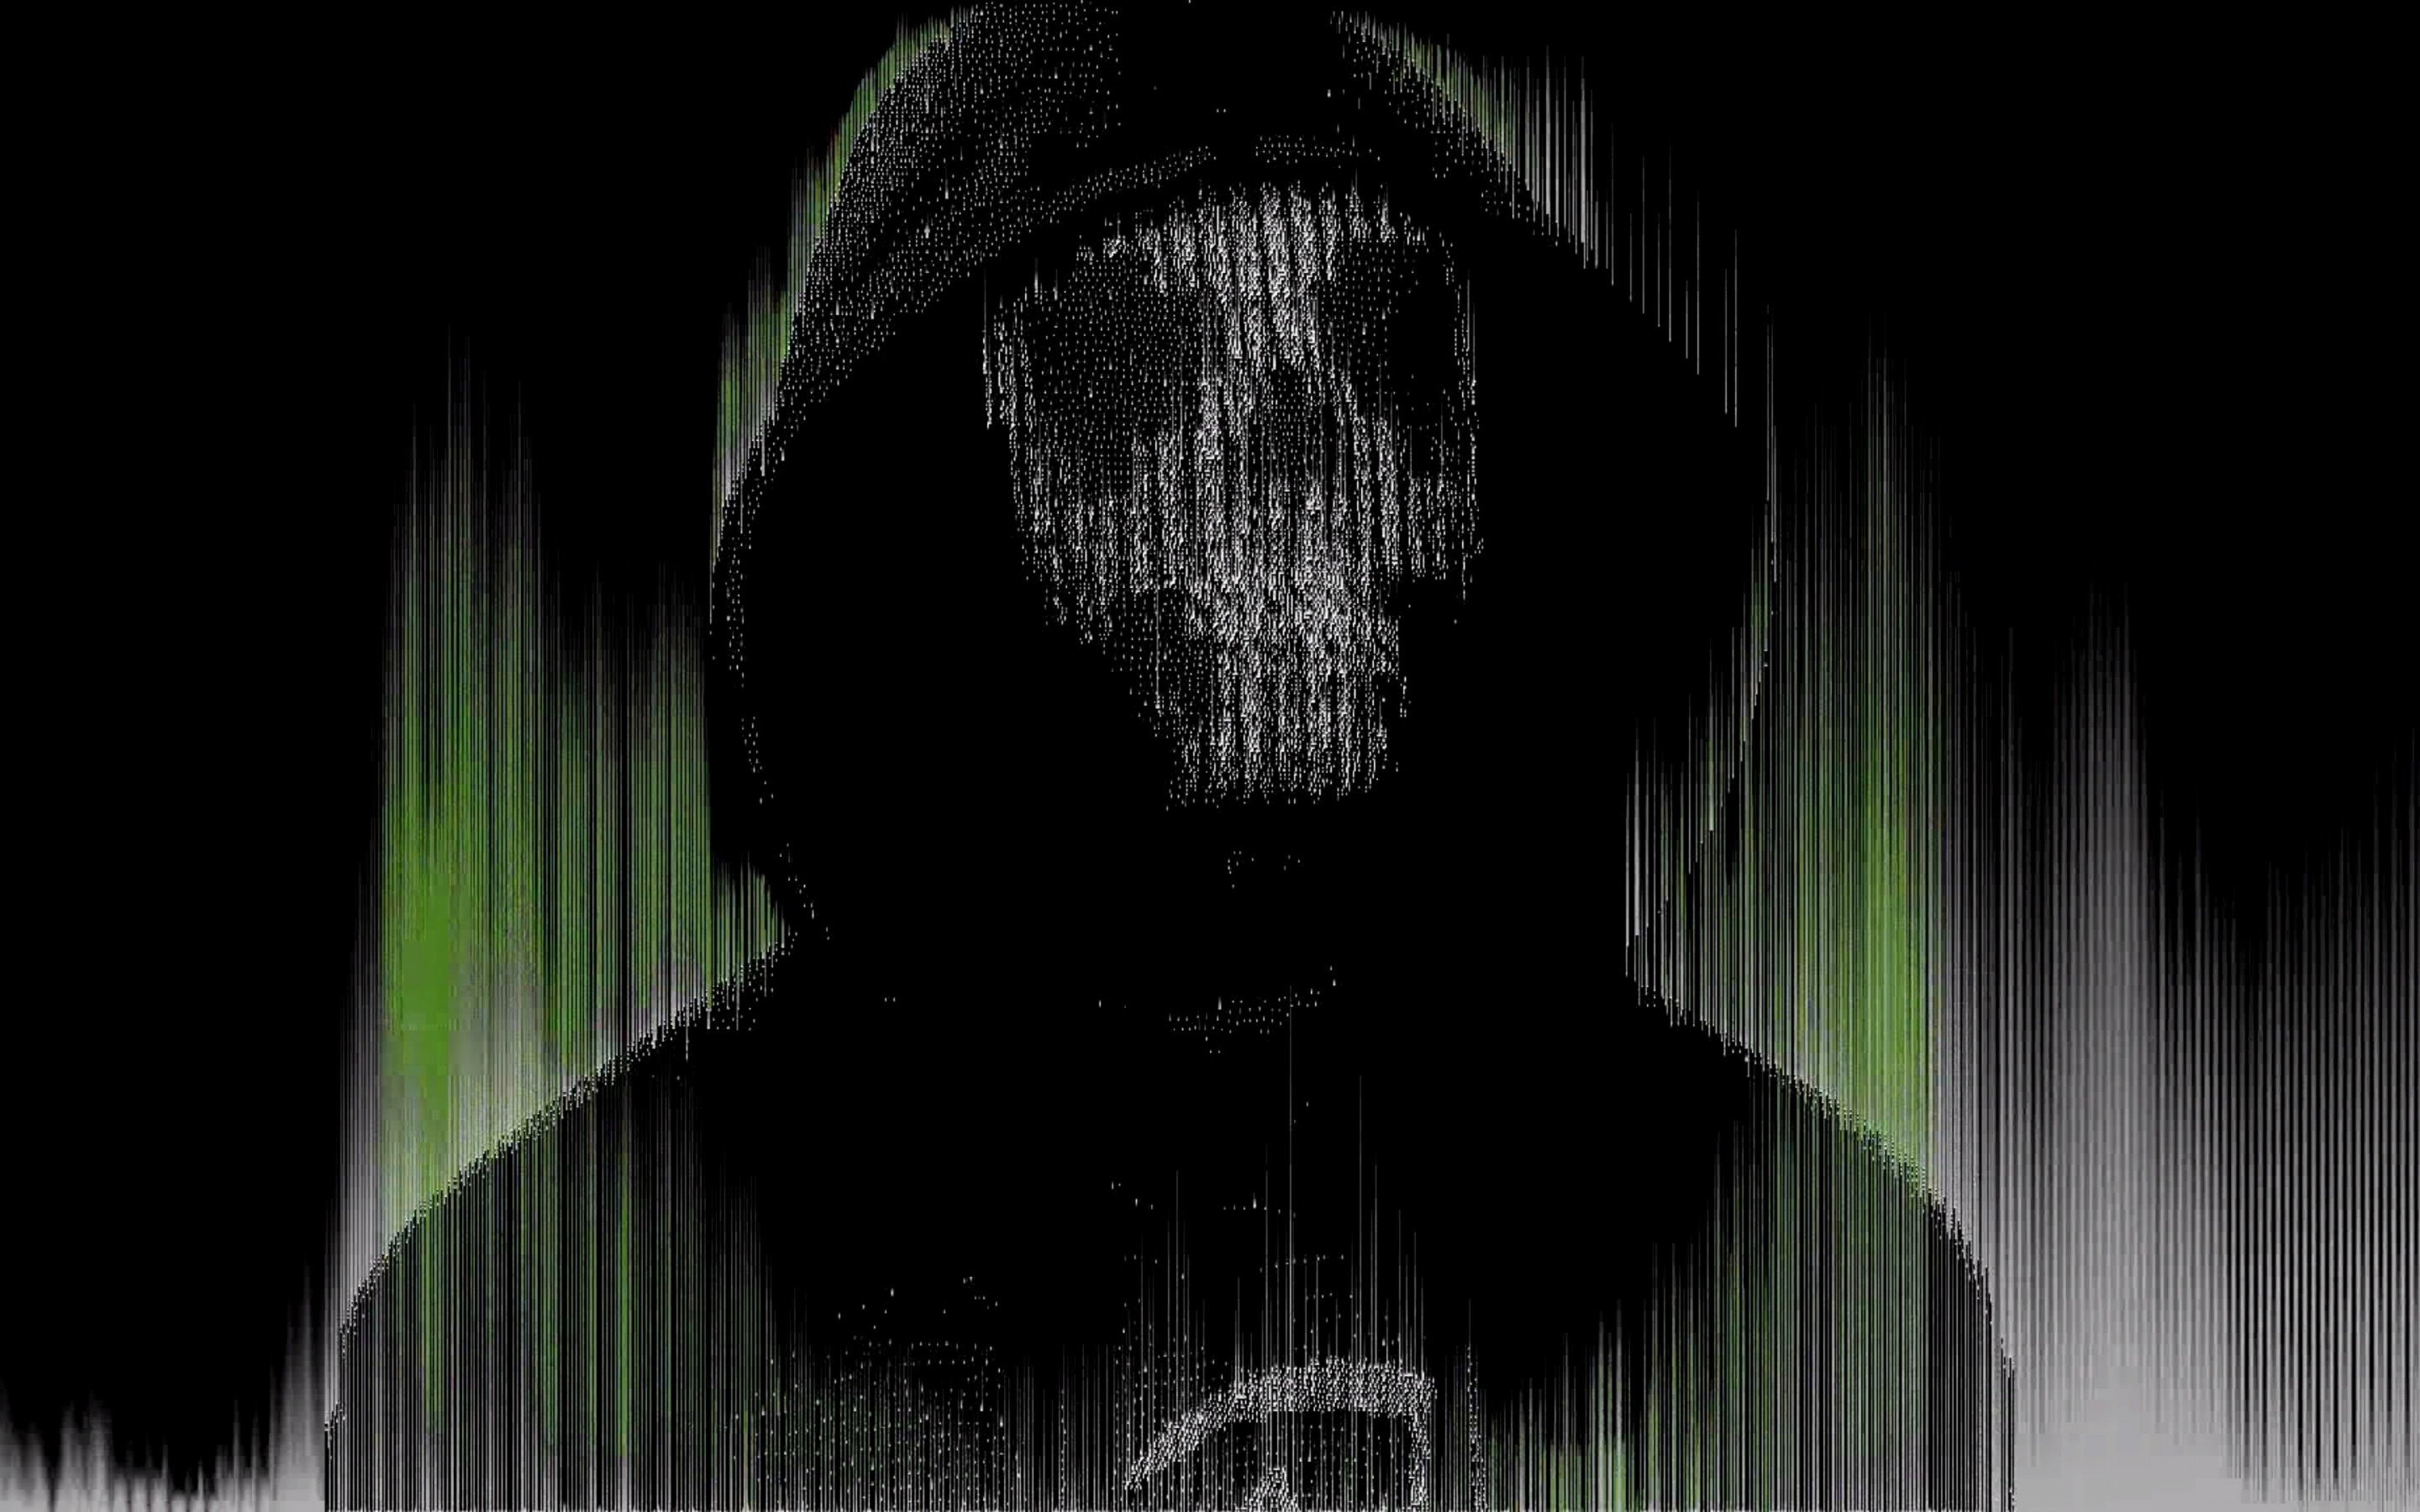 DEDSEC, Watch Dogs, Video games, Watch Dogs 2 Wallpaper